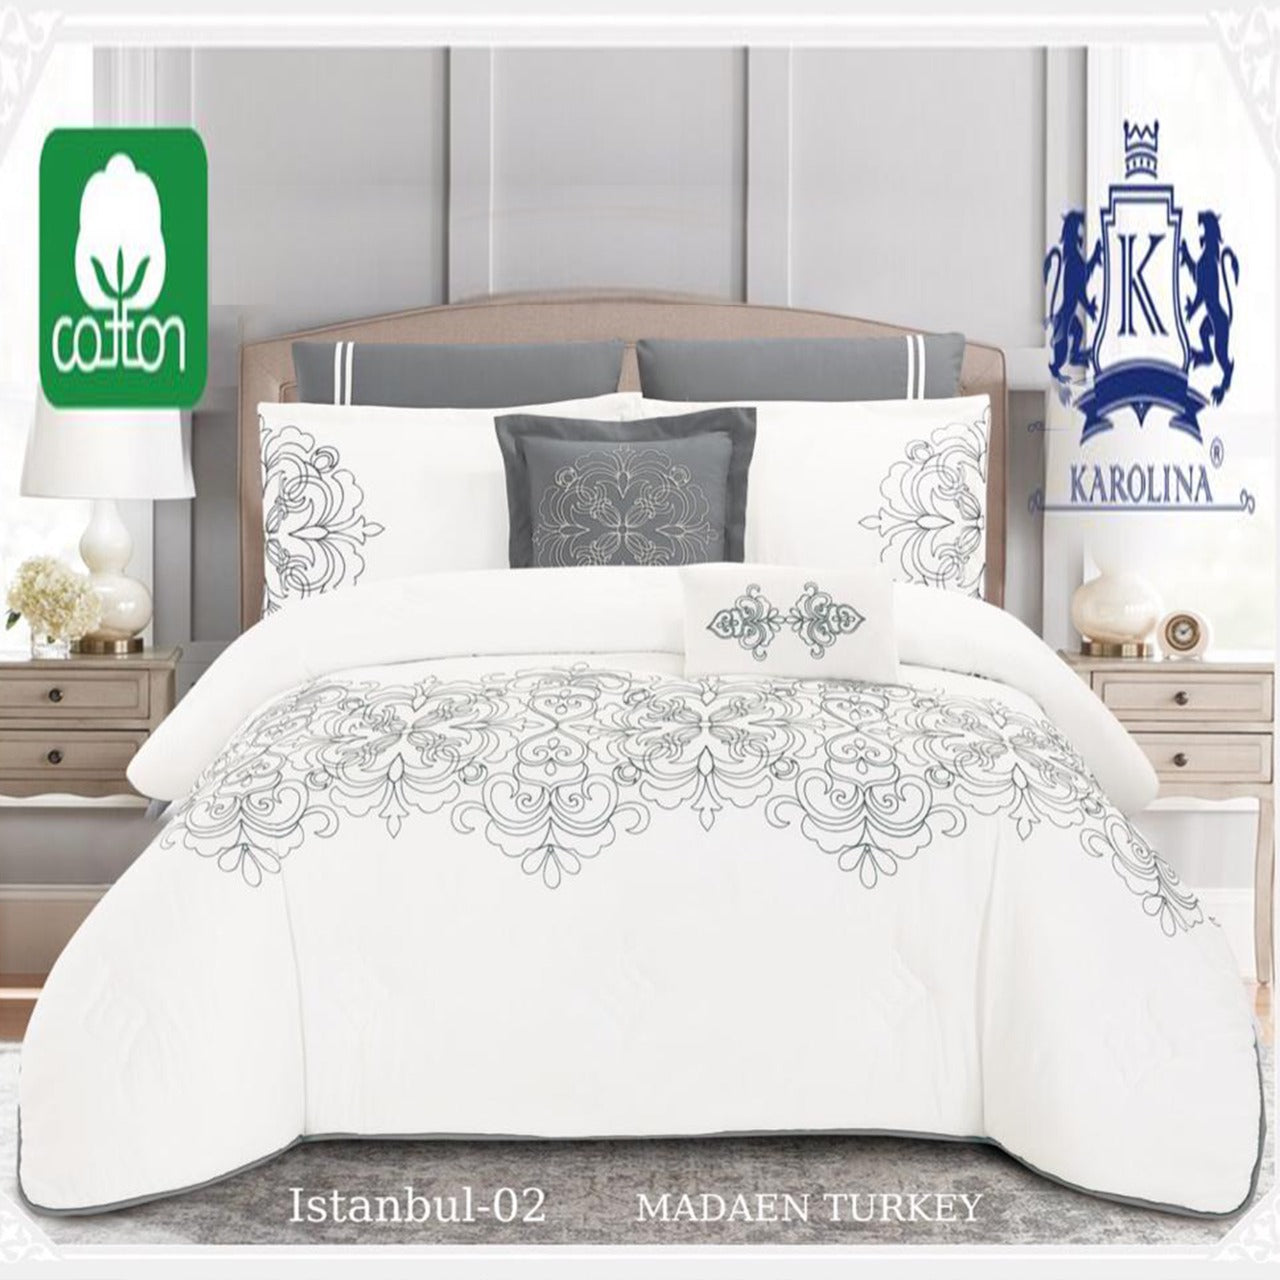 10 Piece Comforter Bedding With Sheet and Decorative Pillow Shams | Made in Turkey Istanbul - 02 Zaappy